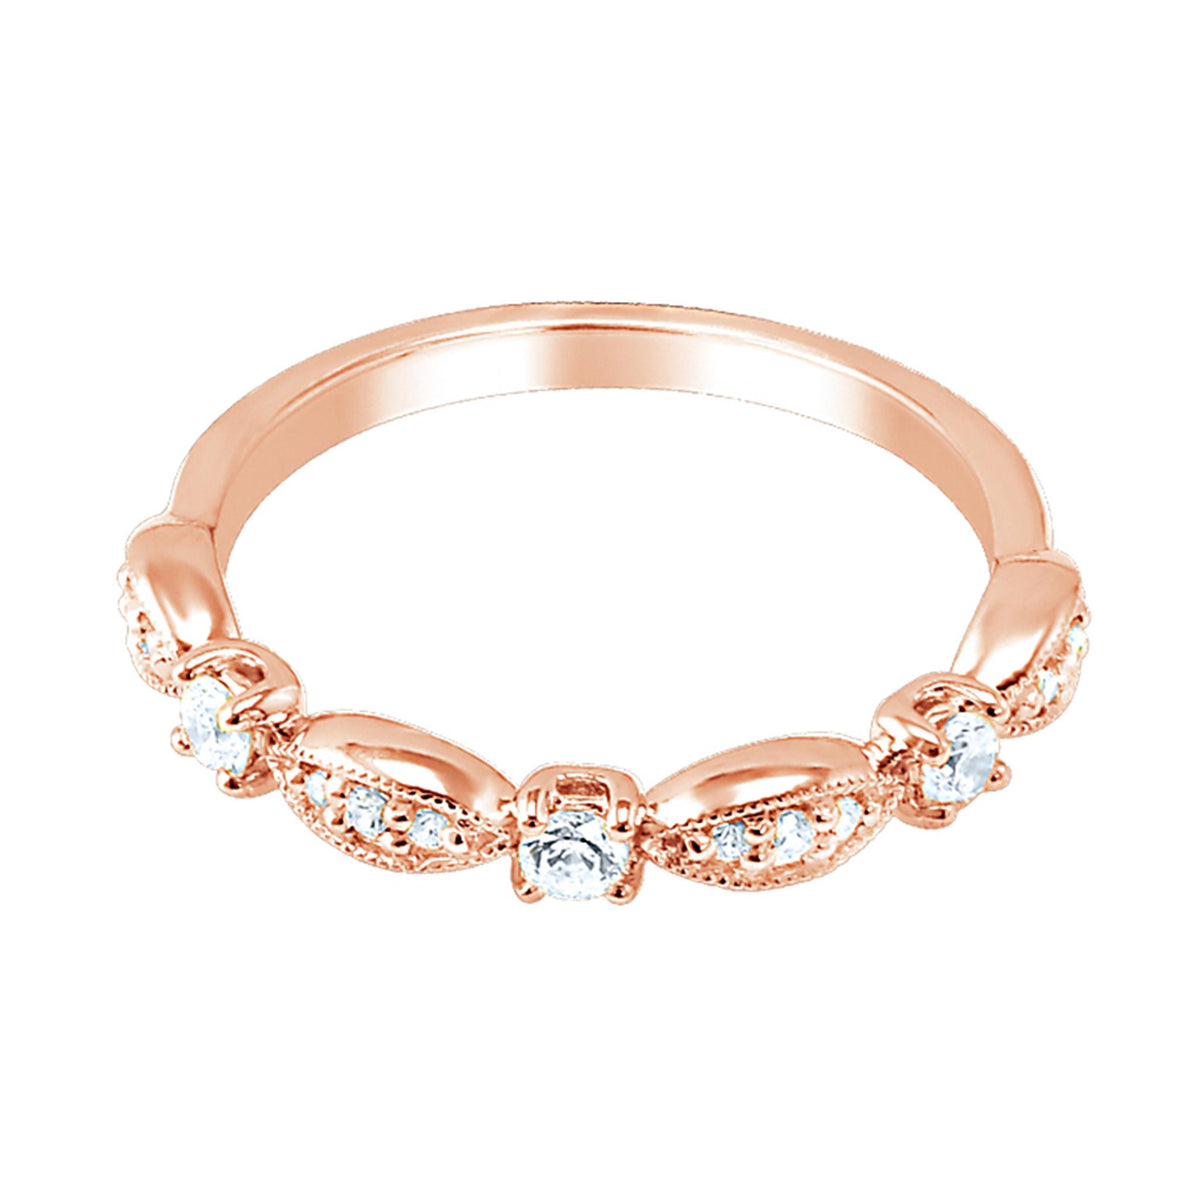 14Kt Rose Gold Stackable Wedding Ring With 0.25cttw Natural Diamonds